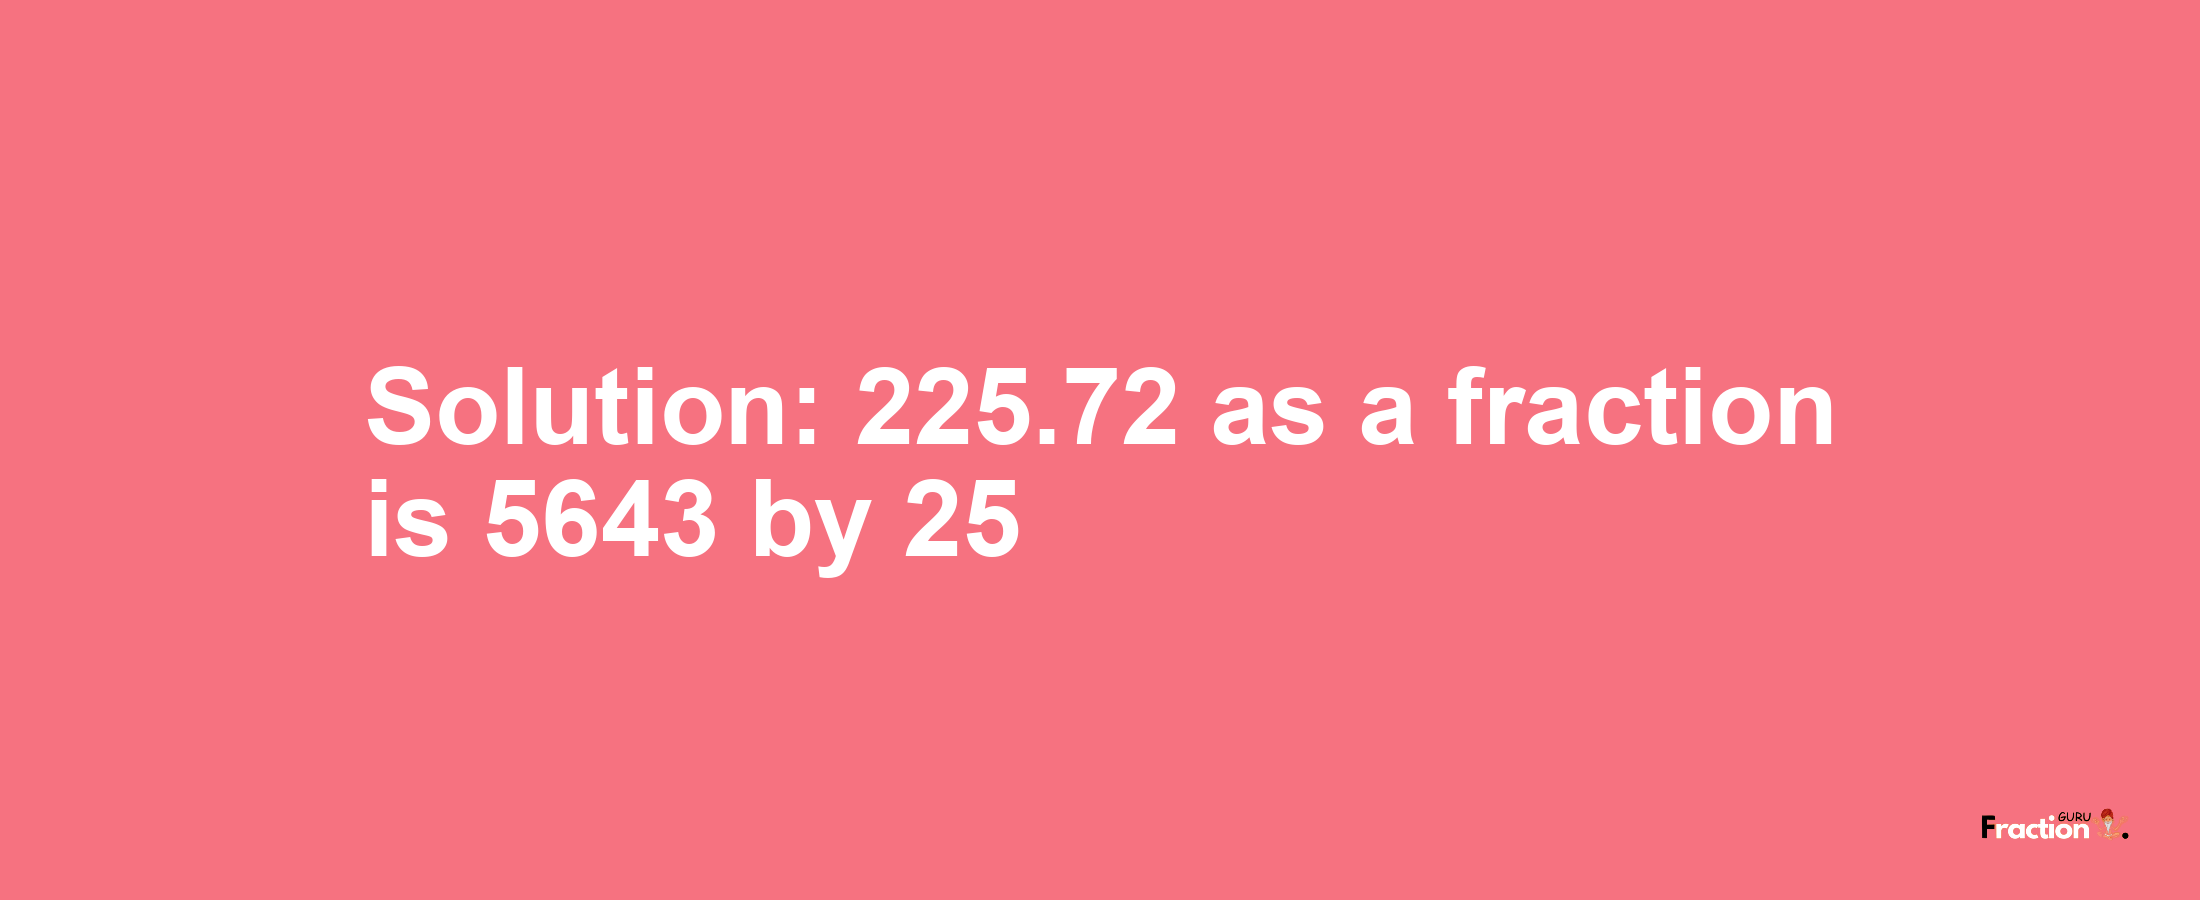 Solution:225.72 as a fraction is 5643/25